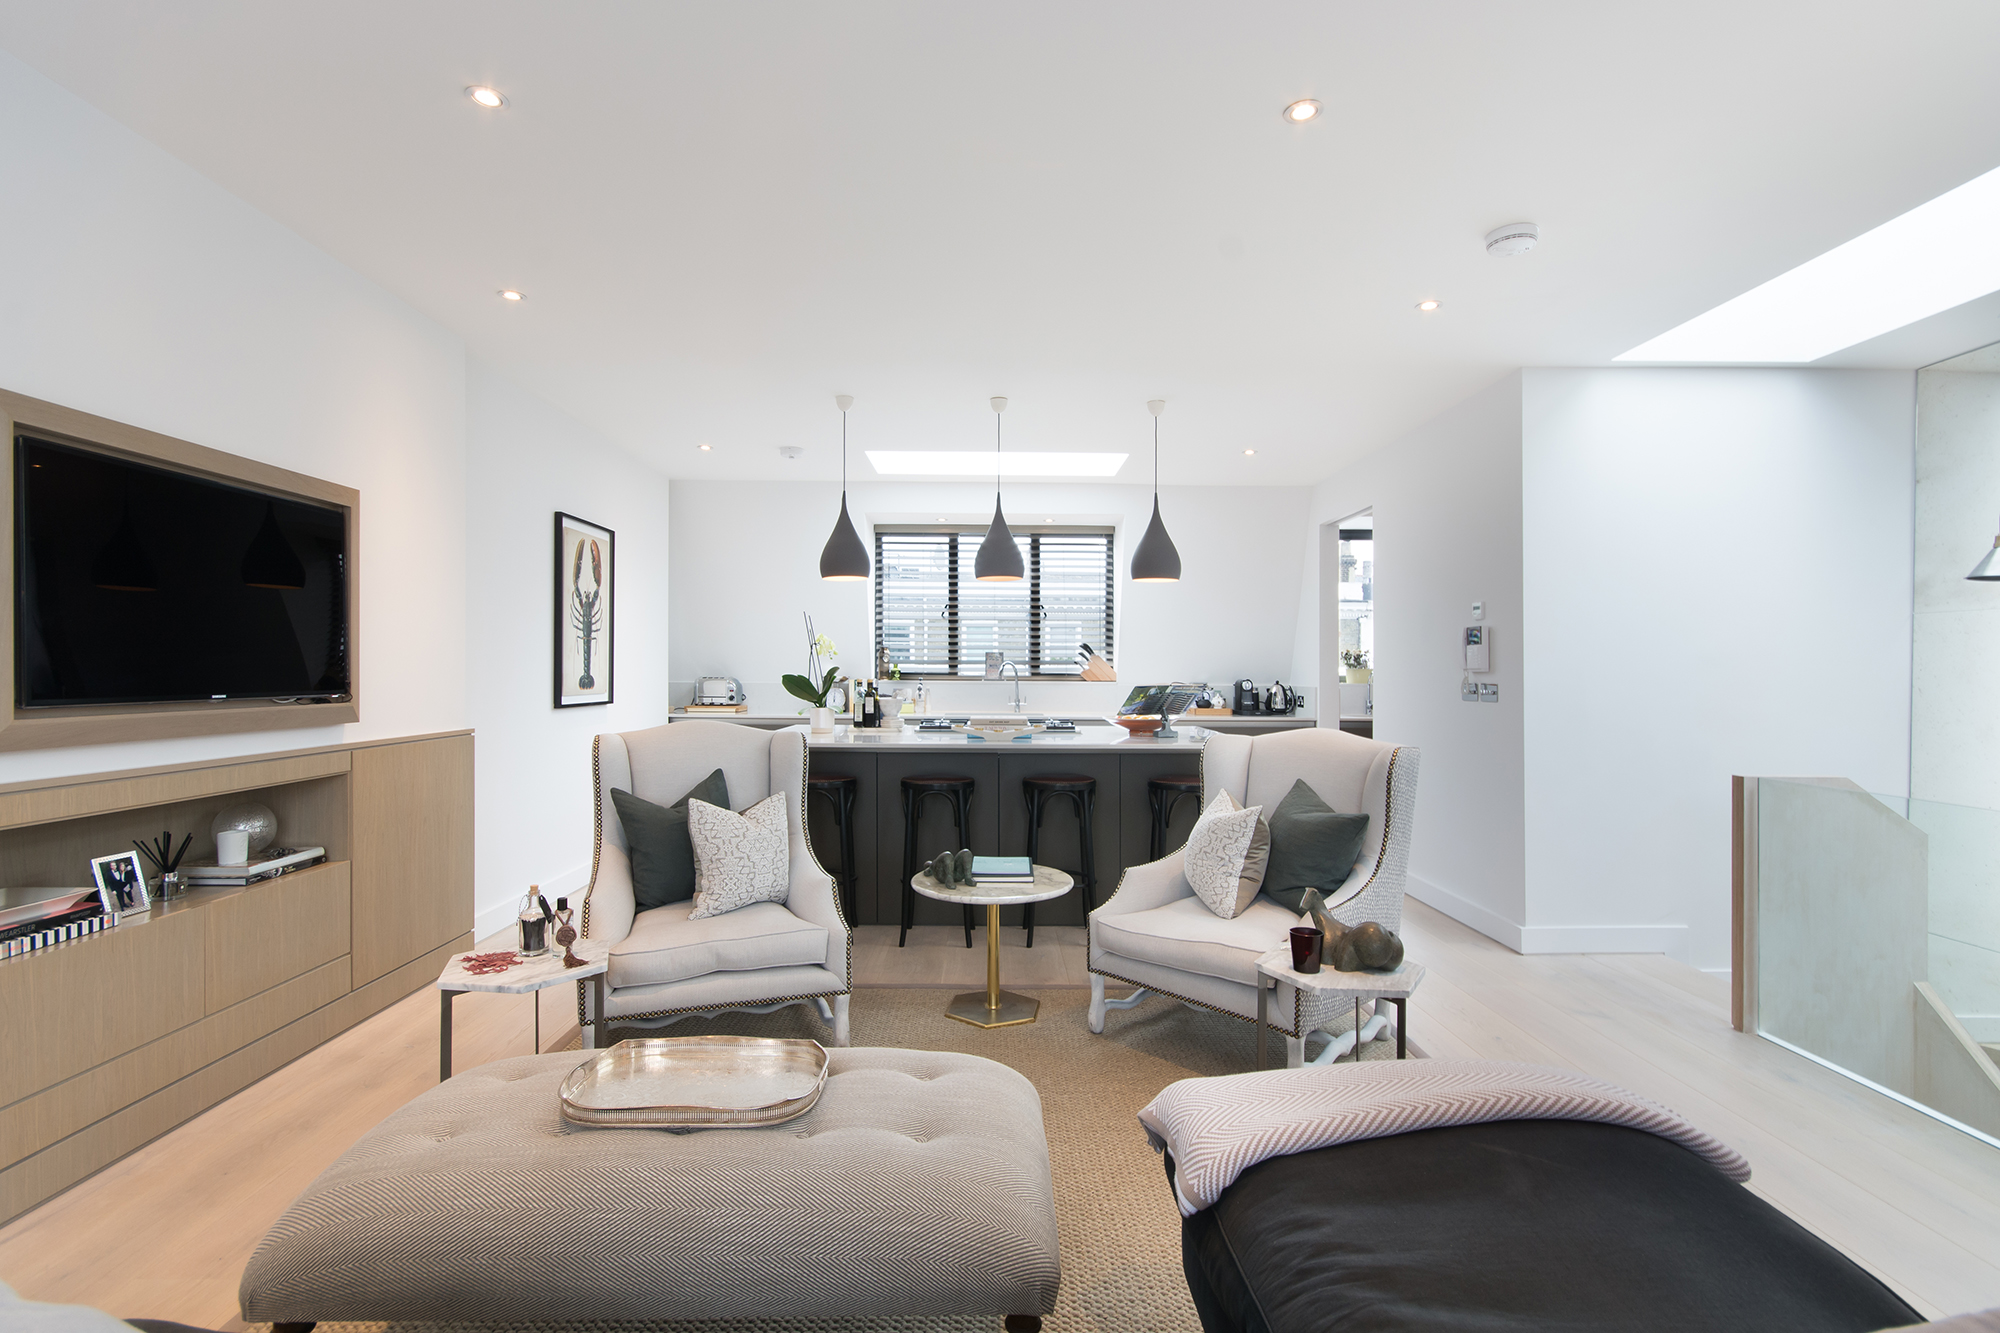 For Sale: Elsham Road Holland Park W11 contemporary kitchen and living room